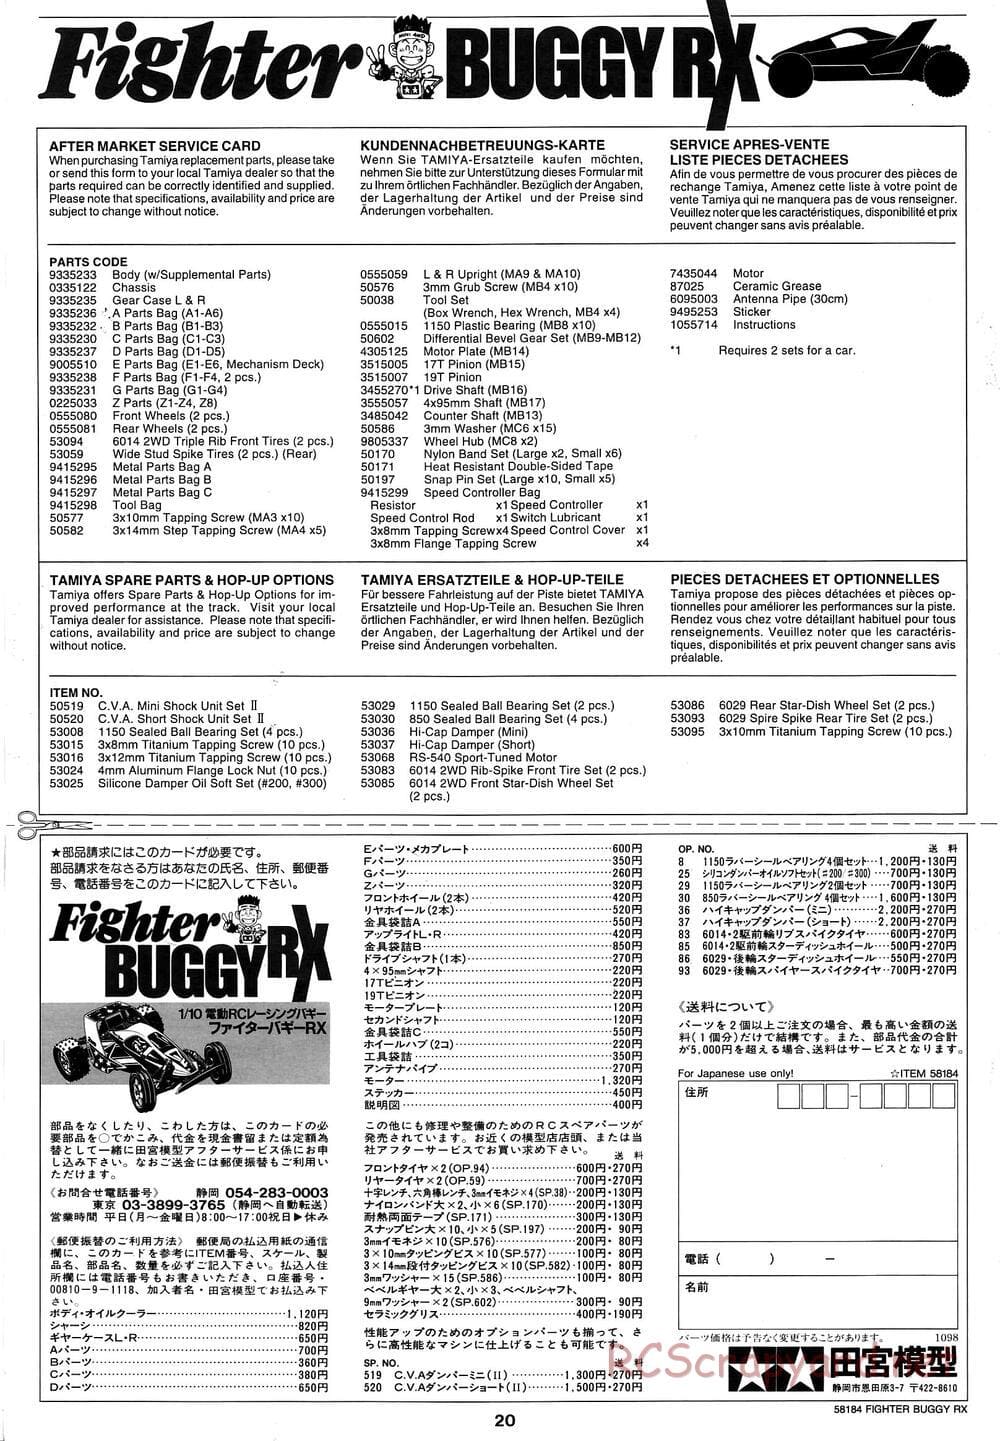 Tamiya - Fighter Buggy RX Chassis - Manual - Page 20